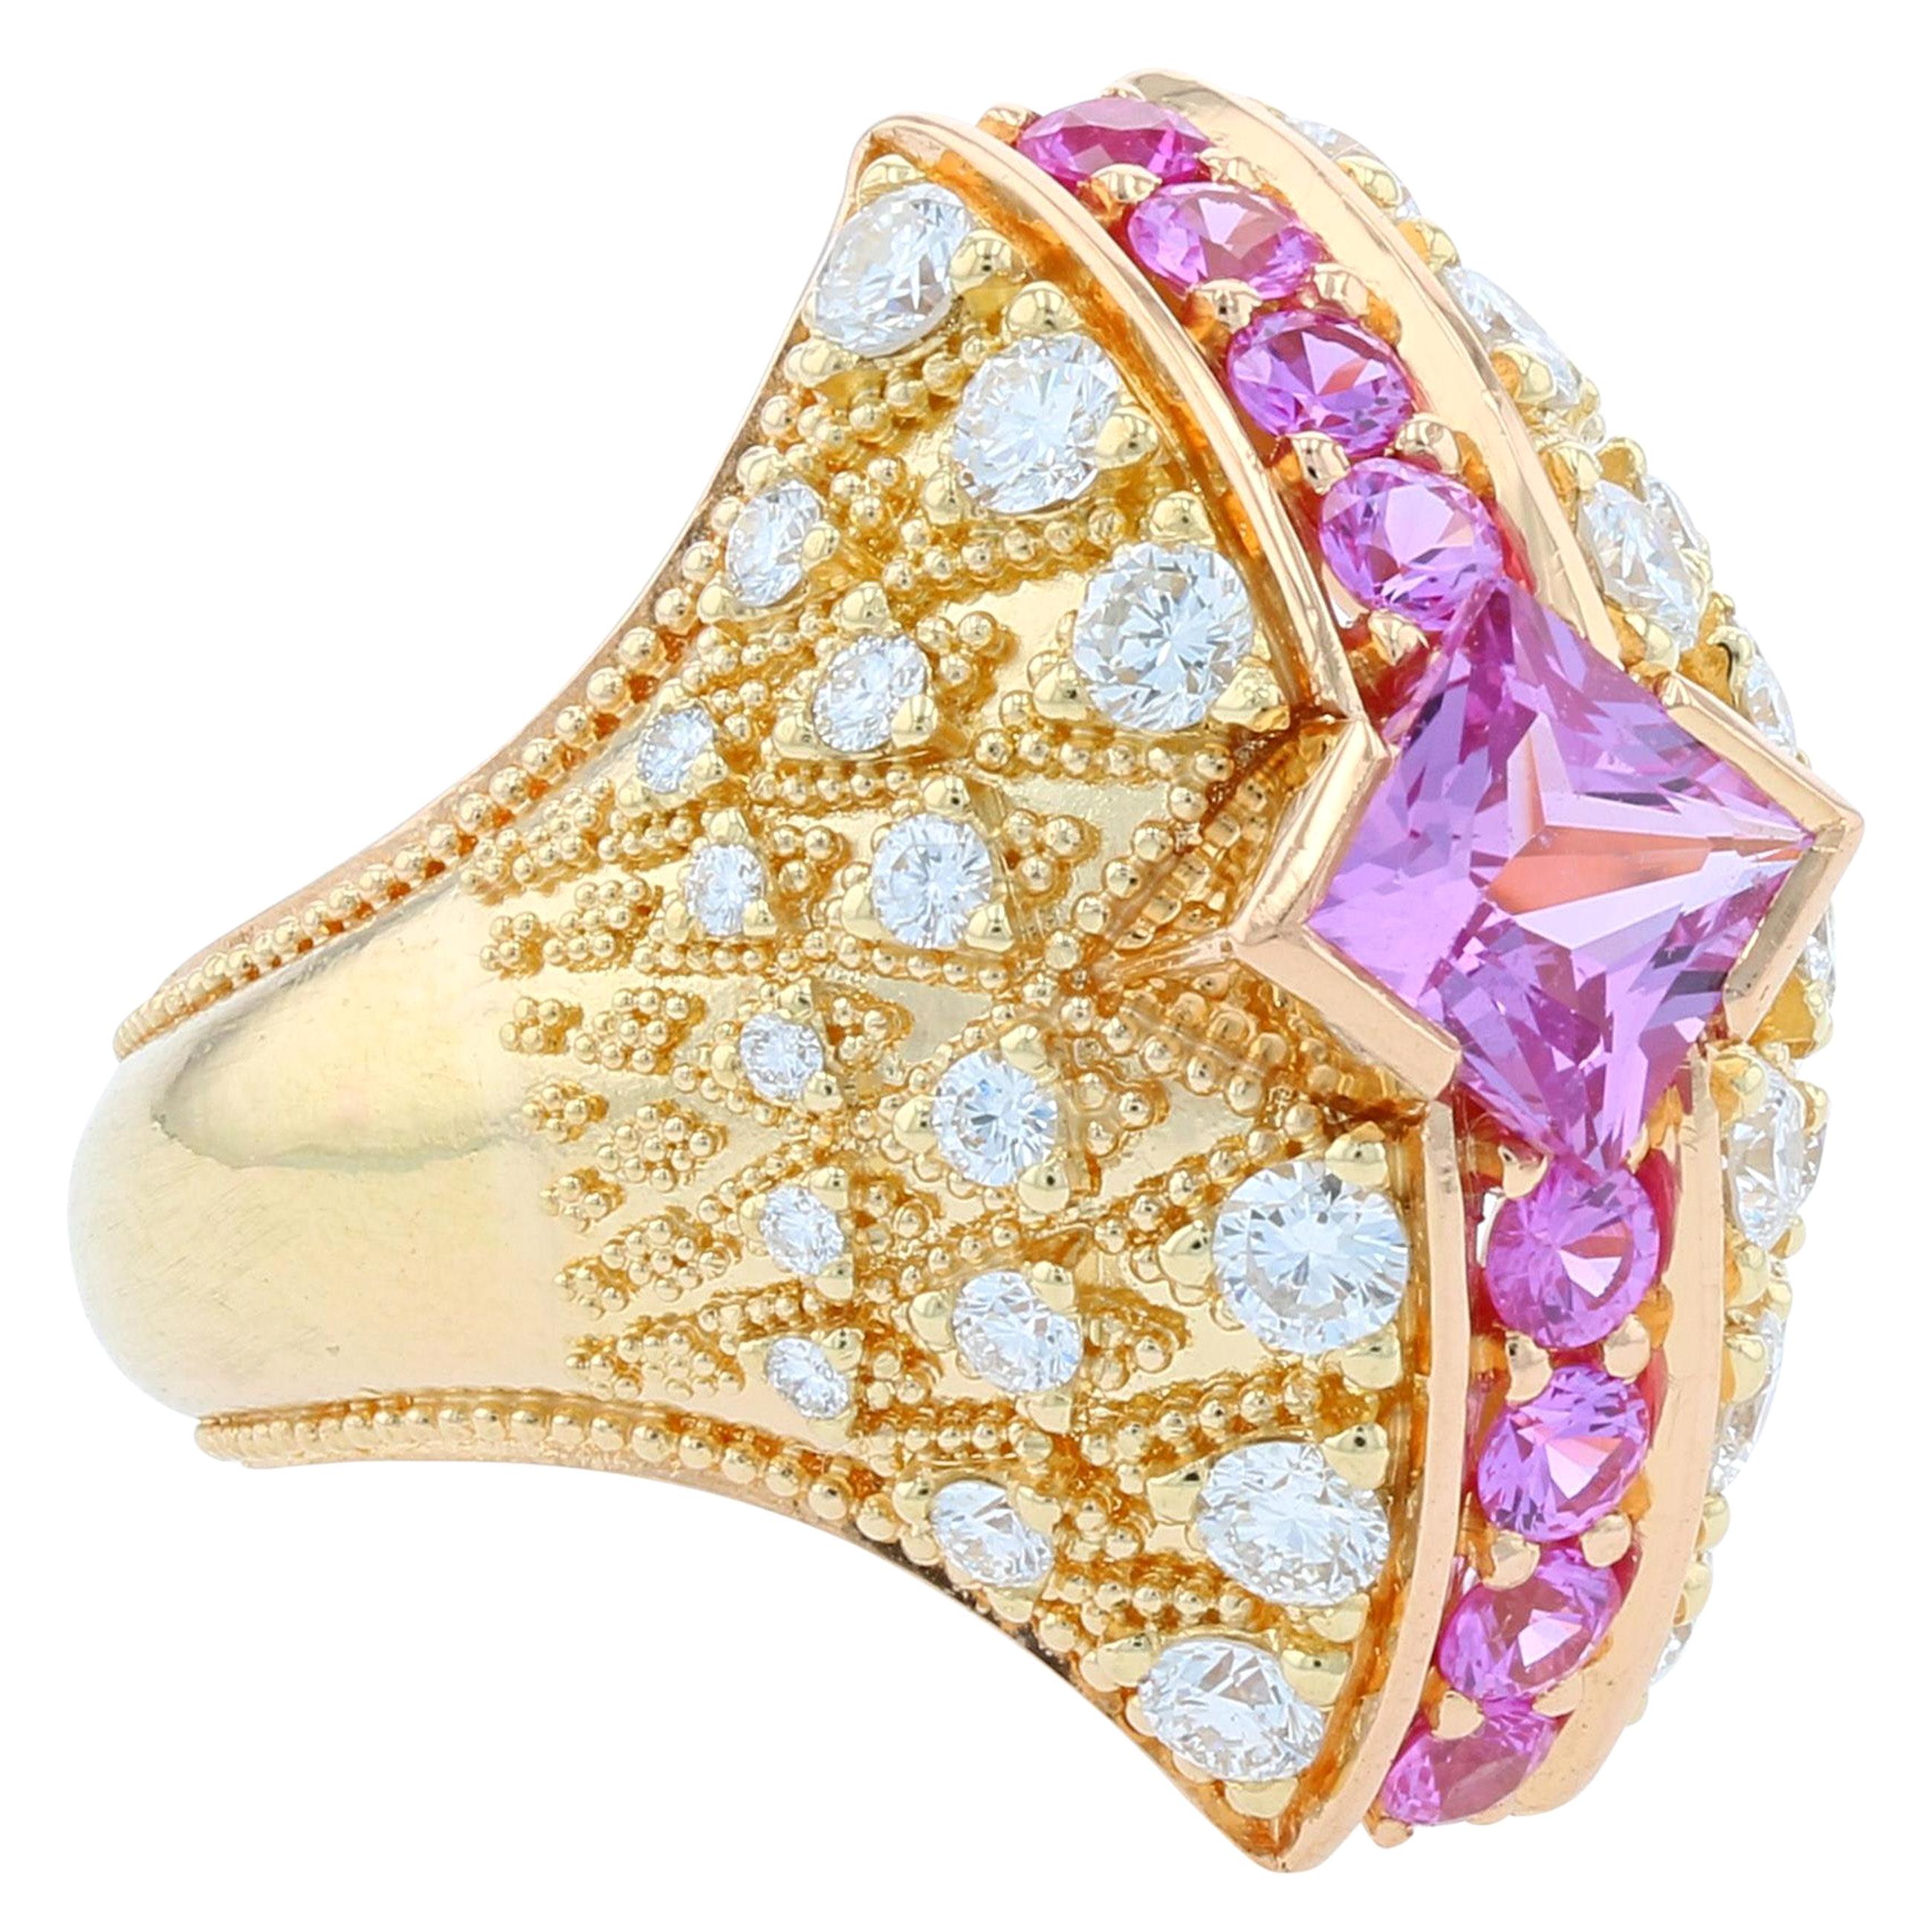 Kent Raible's Pink Sapphire and Diamond Bombe Fan Ring in 18K, Fine Granulation